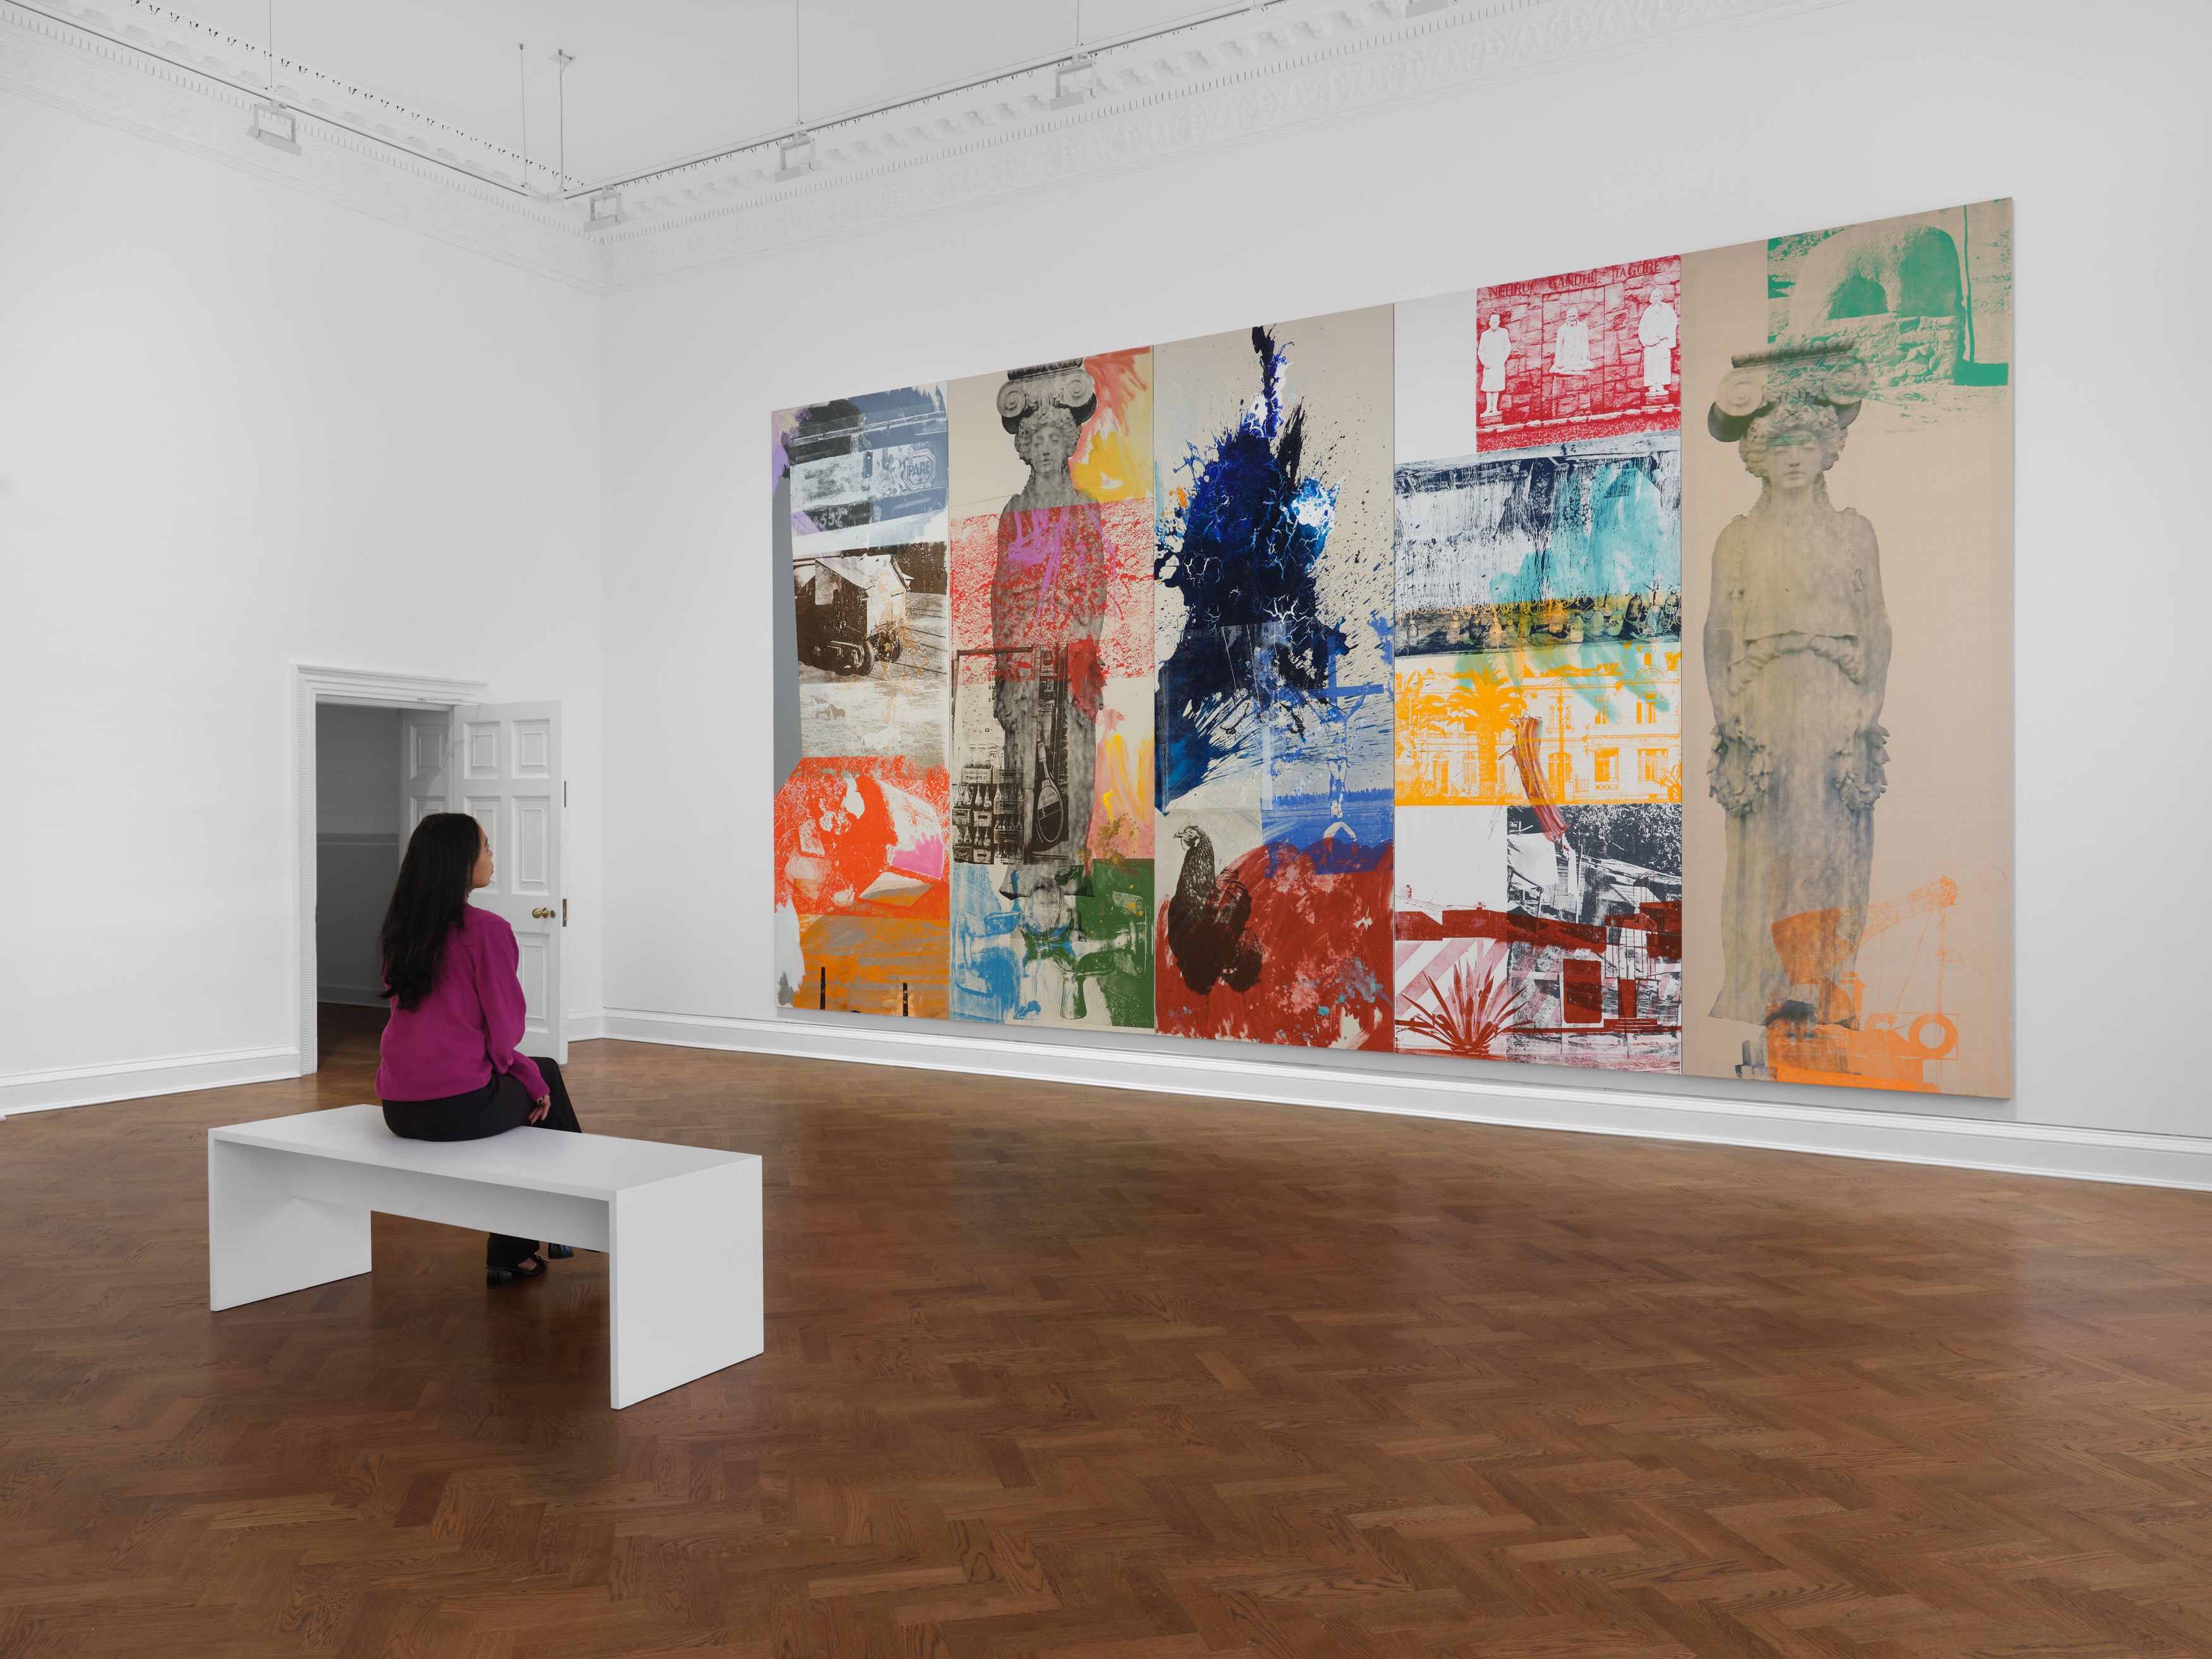 Rauschenberg’s ‘Caryatid Cavalcade I’ from Roci Chile, 1985 (silkscreen ink, acrylic, and graphite on canvas) is part of the new exhibition exhibition